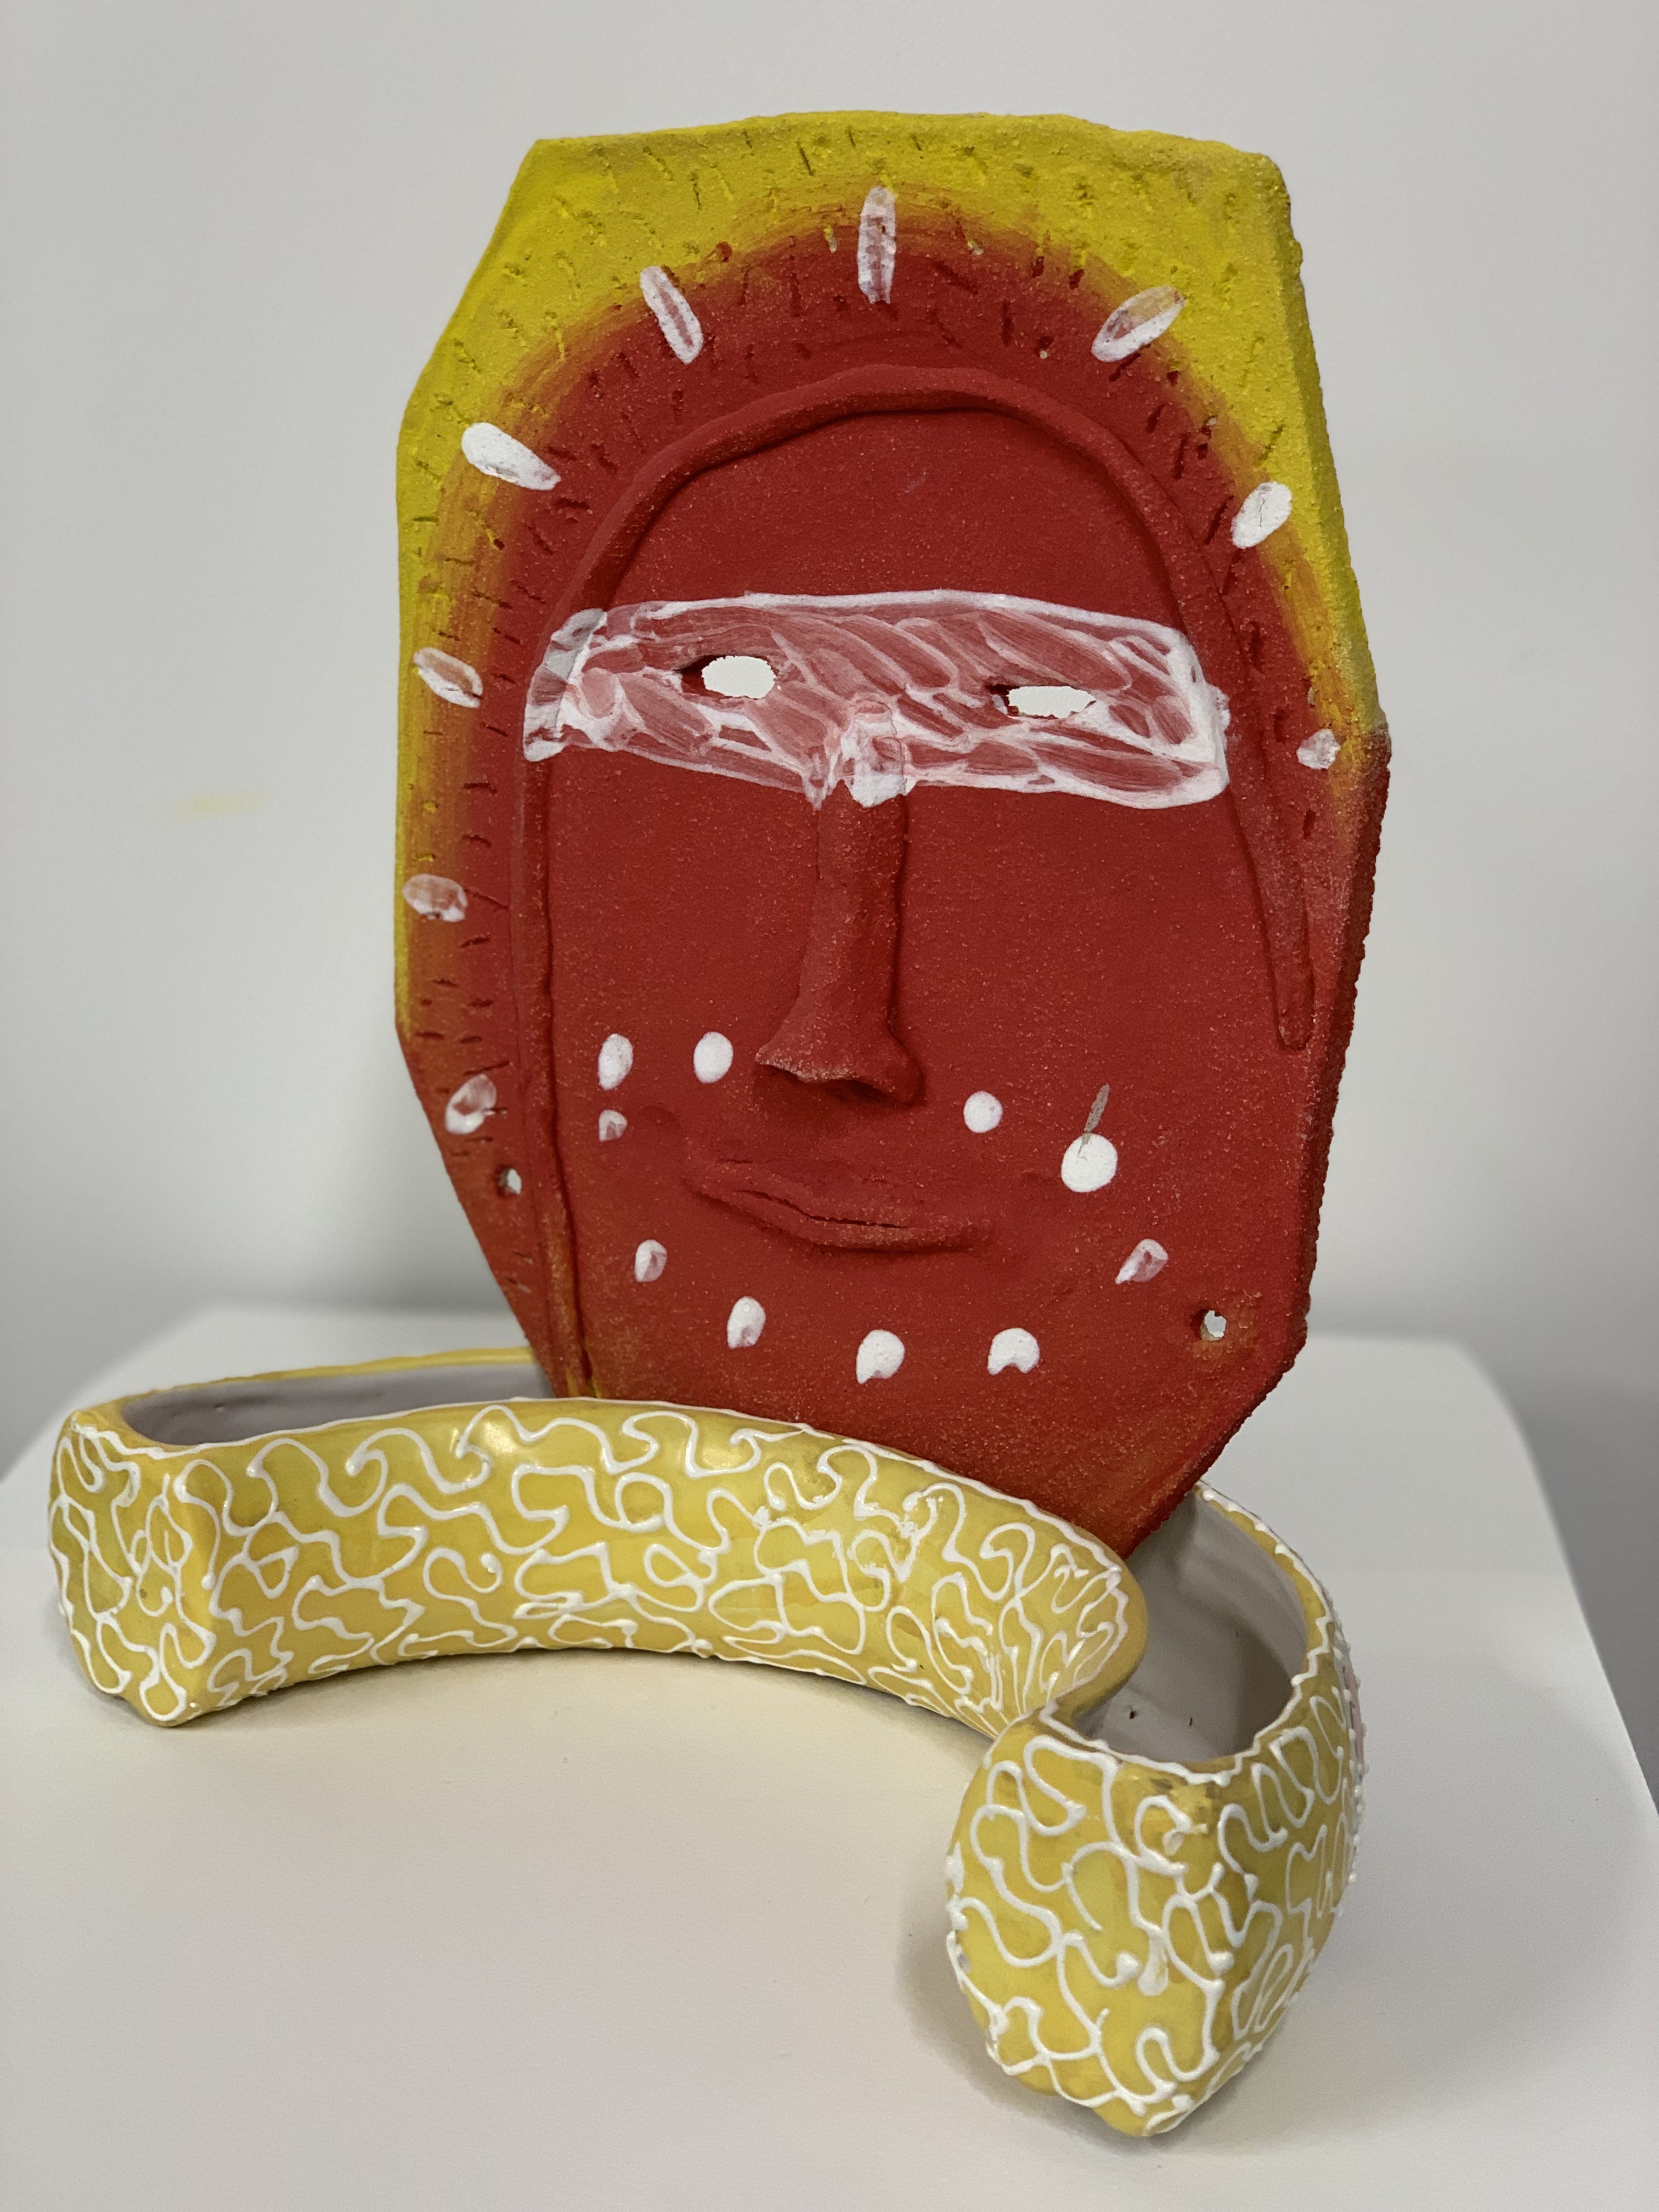 Sculpture by Rachel Walters in glazed stoneware and found ceramic titled Papa as in Papatuanuku